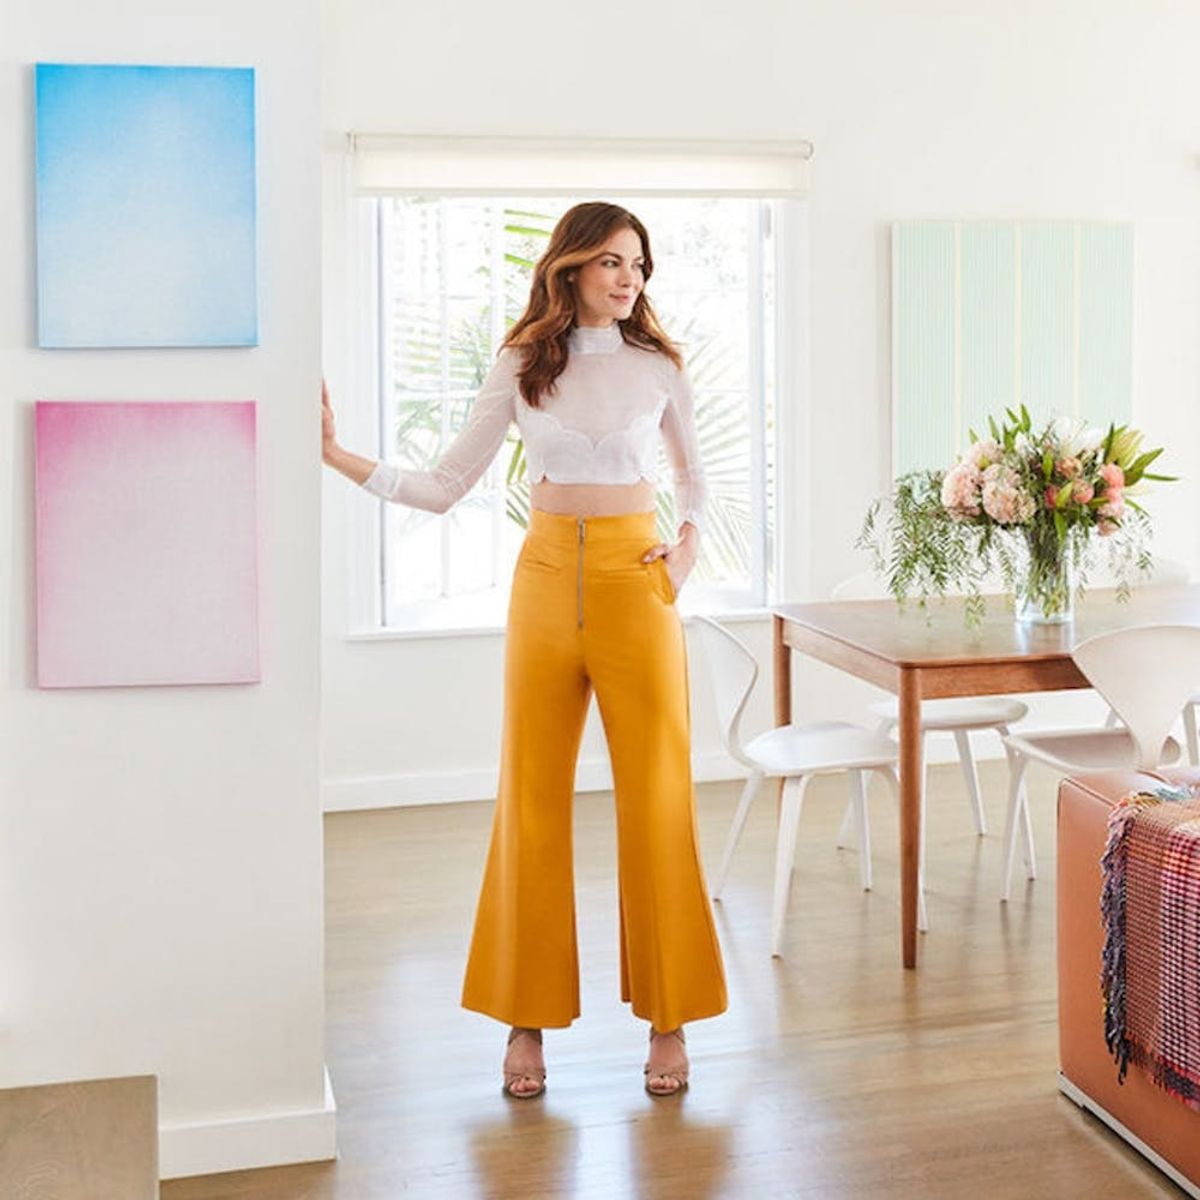 Steal the Look of Michelle Monaghan’s Vintage-Meets-Modern Home